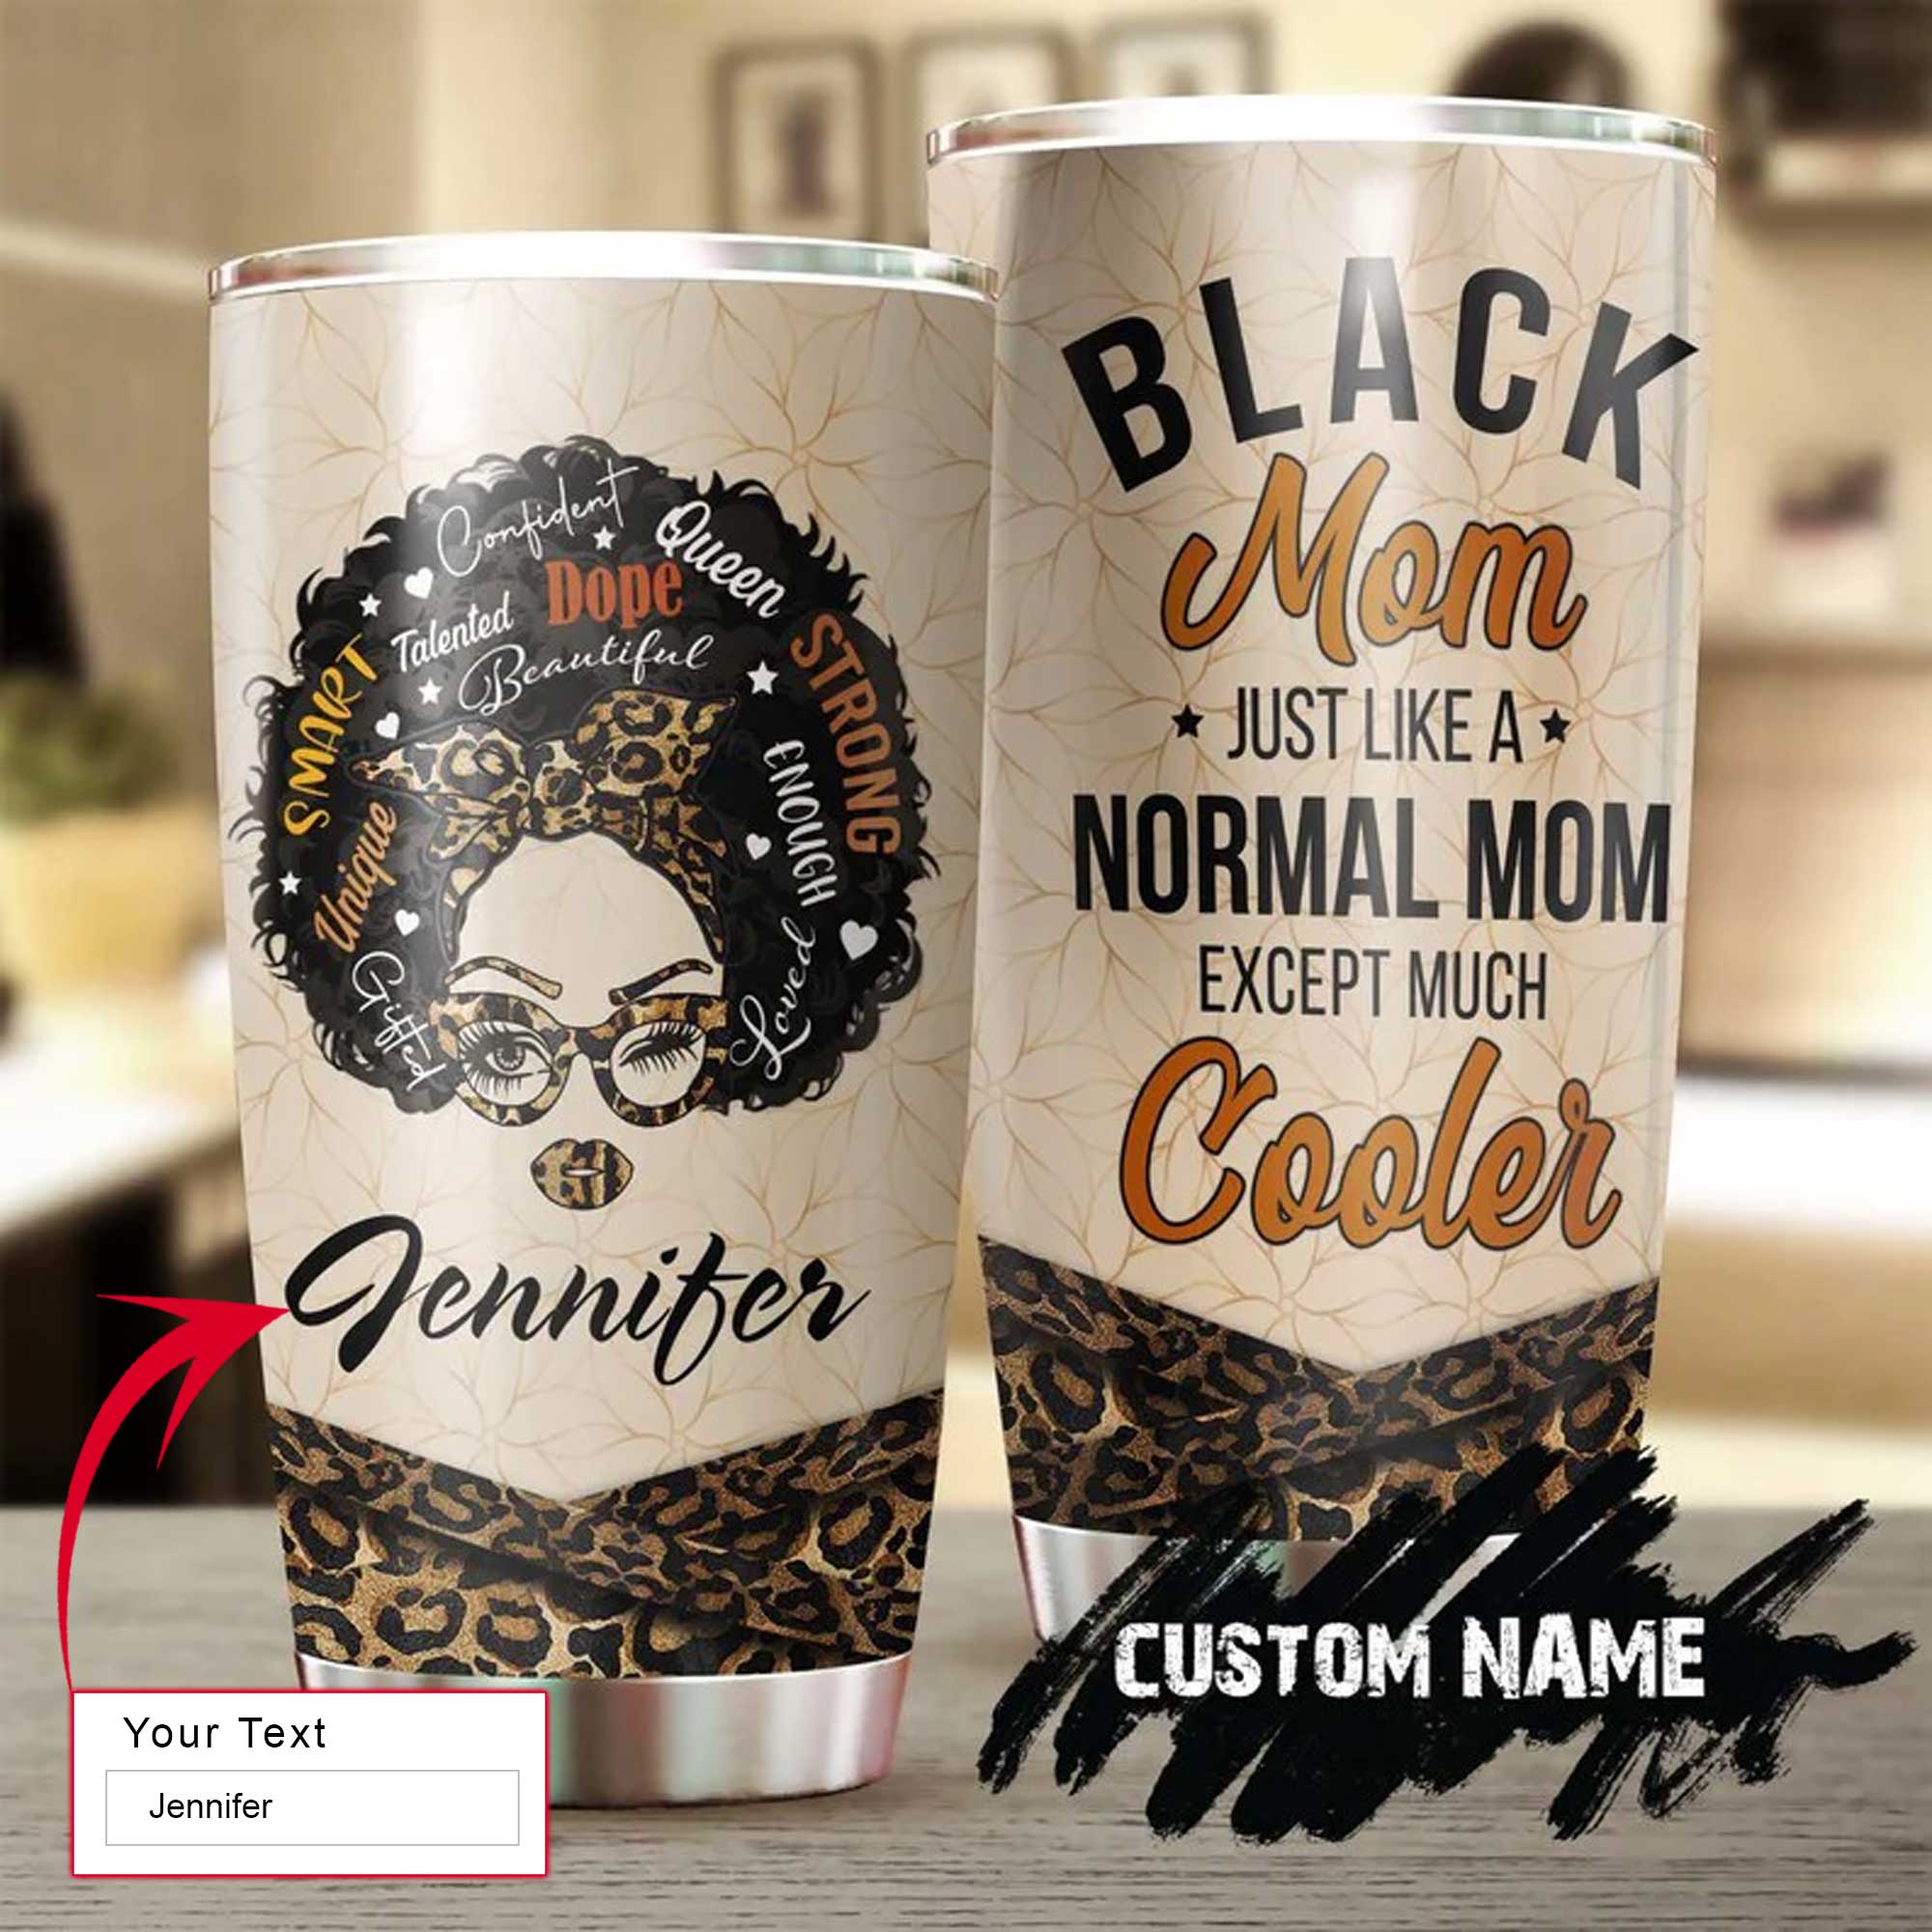 Personalized Mother's Day Gift Tumbler - Custom Gift For Mother's Day, Presents for Mom - Black Mom, Just Like Normal Mom Except Much Cooler Tumbler